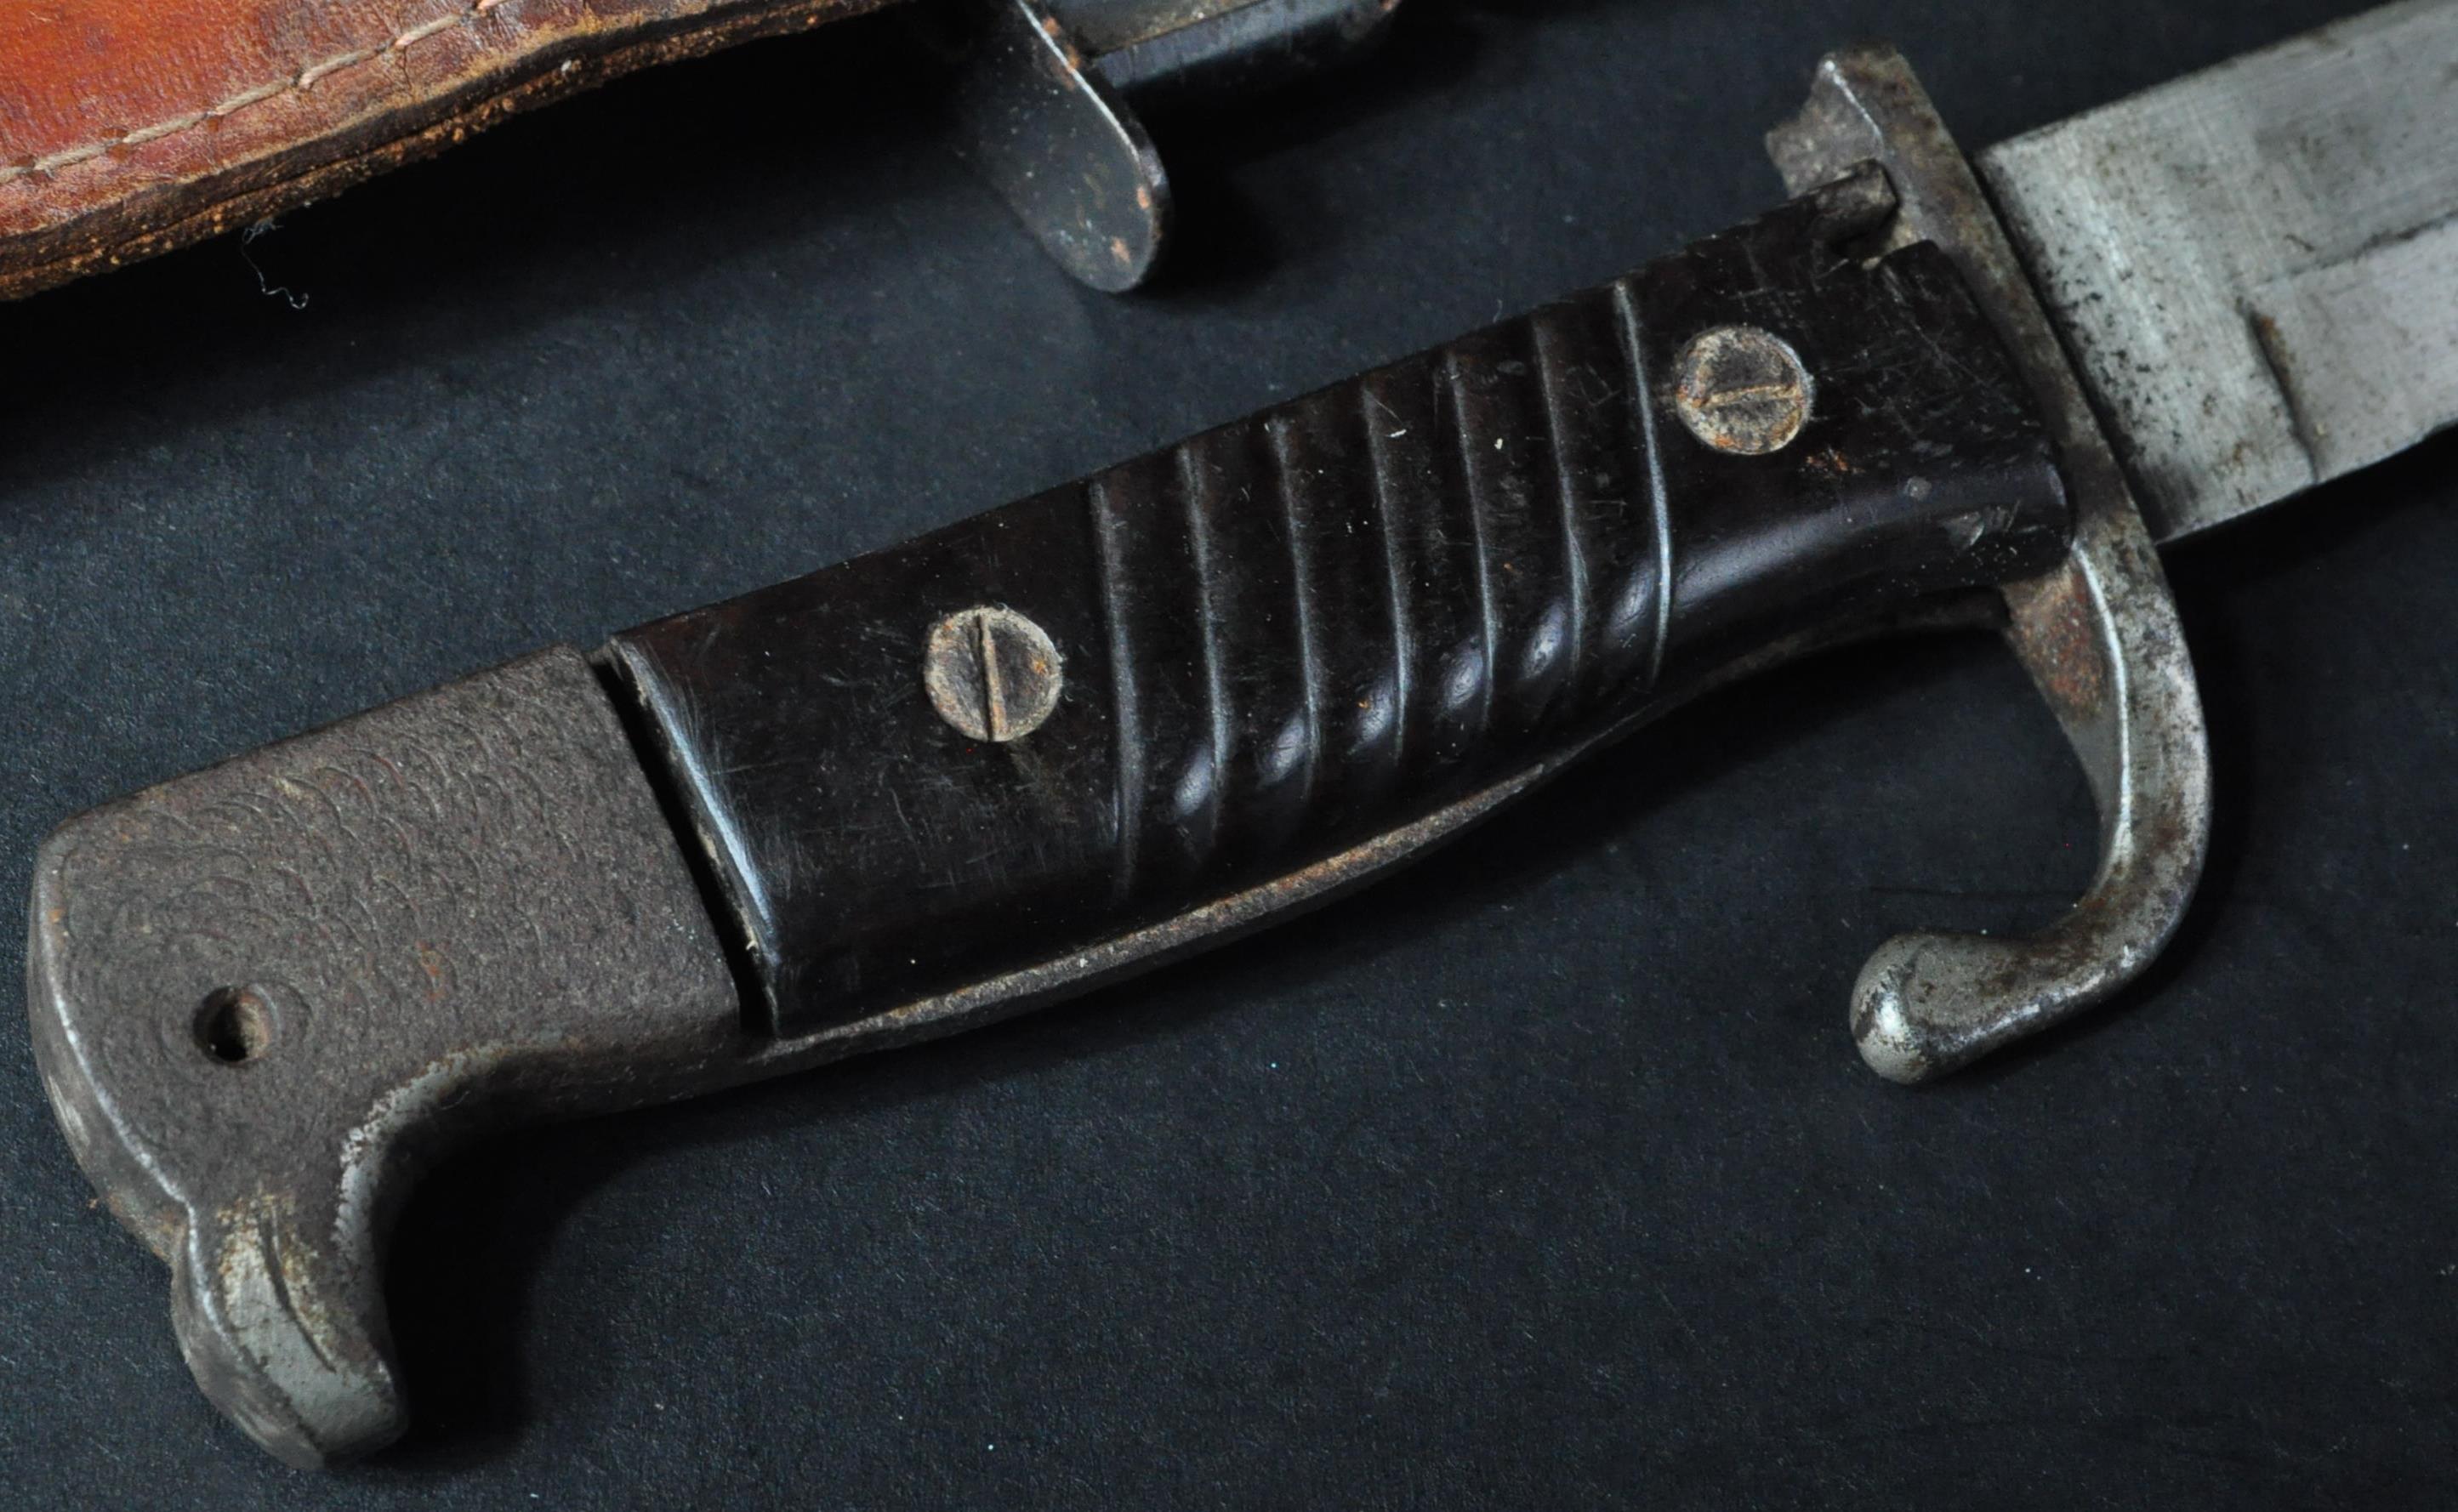 WWII SECOND WORLD WAR PERIOD FIGHTING KNIFE - Image 5 of 6